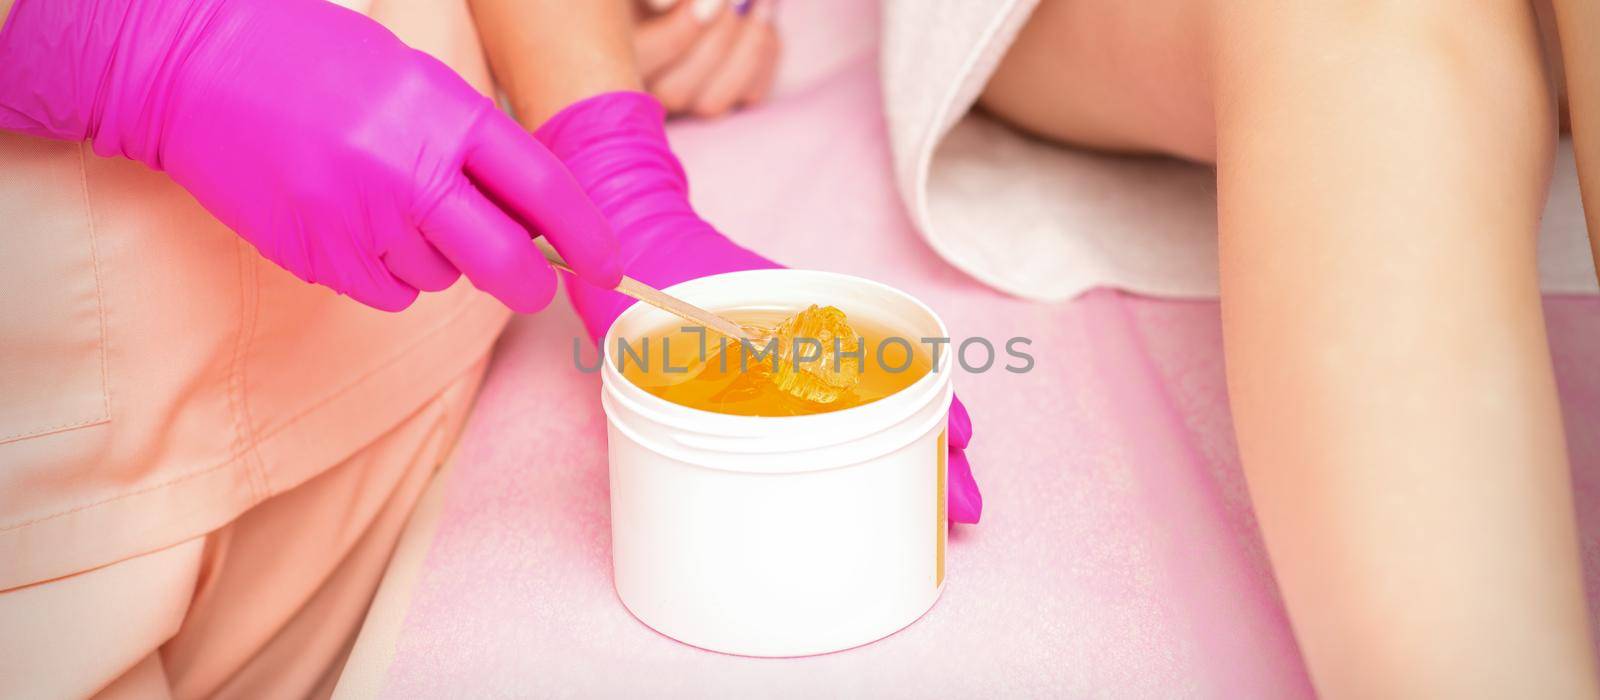 Beautician with a white jar of wax sugaring before hair removal at the spa